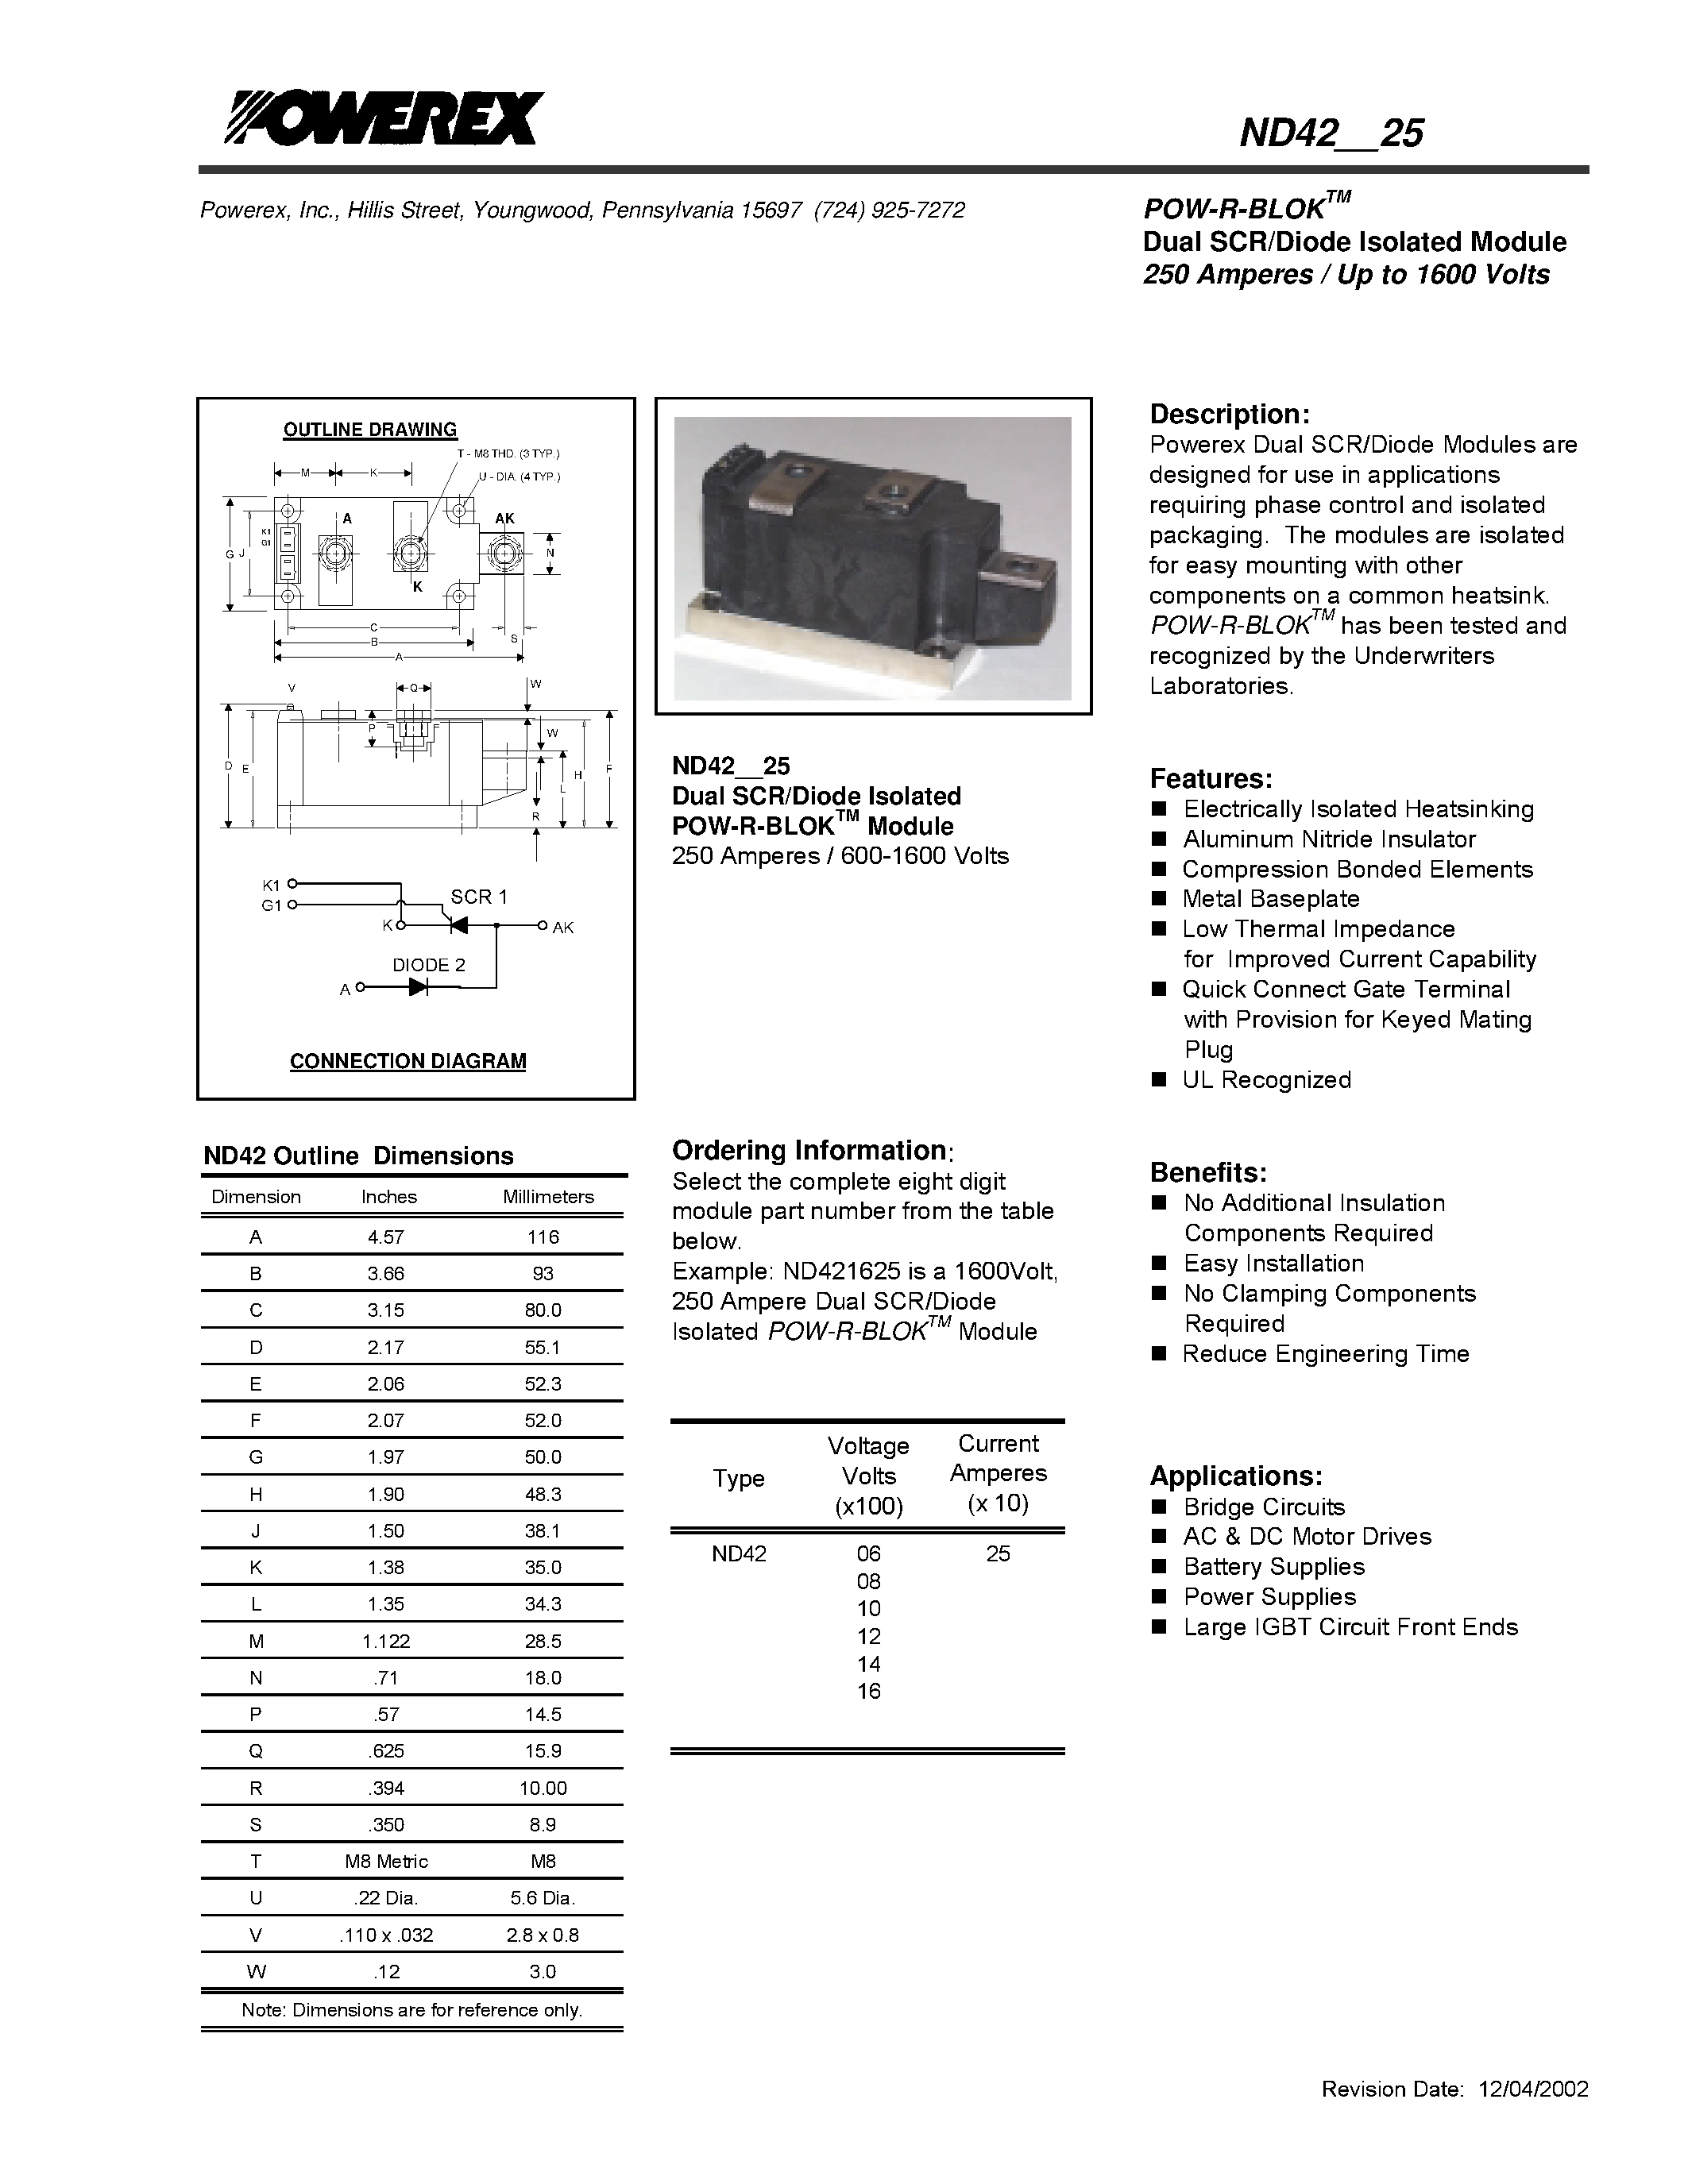 Datasheet ND421225 - POW-R-BLOK Dual SCR/Diode Isolated Module (250 Amperes / Up to 1600 Volts) page 1